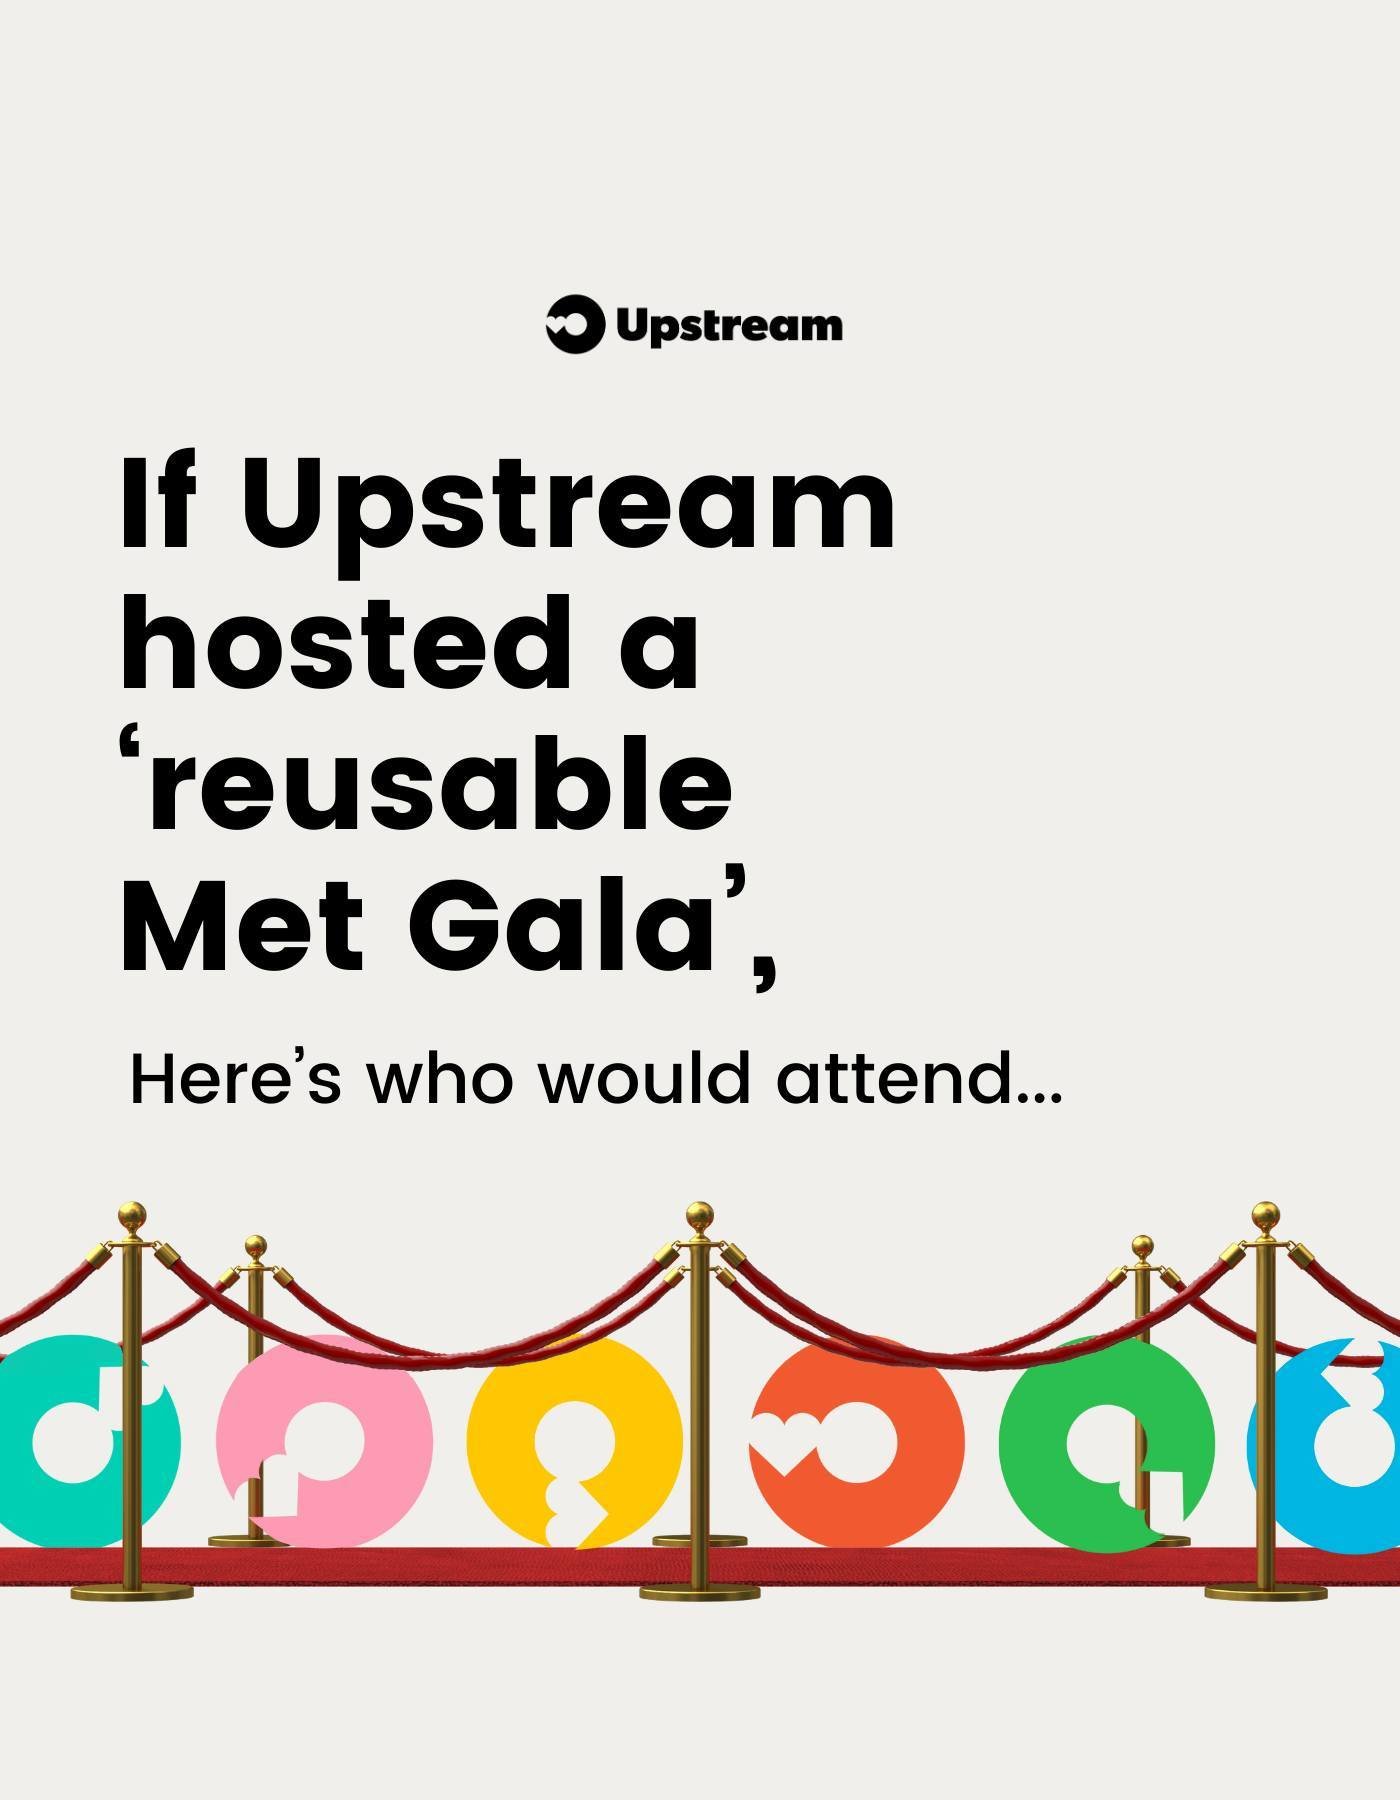 Just kidding, we&rsquo;ll stick to The Reusies for now&hellip;👀✨

But if Upstream DID host a &lsquo;Met Gala for reusables&rsquo;, there would be no single-use cups allowed! 

Single-use aluminum cups are not a sustainable option when compared to ot